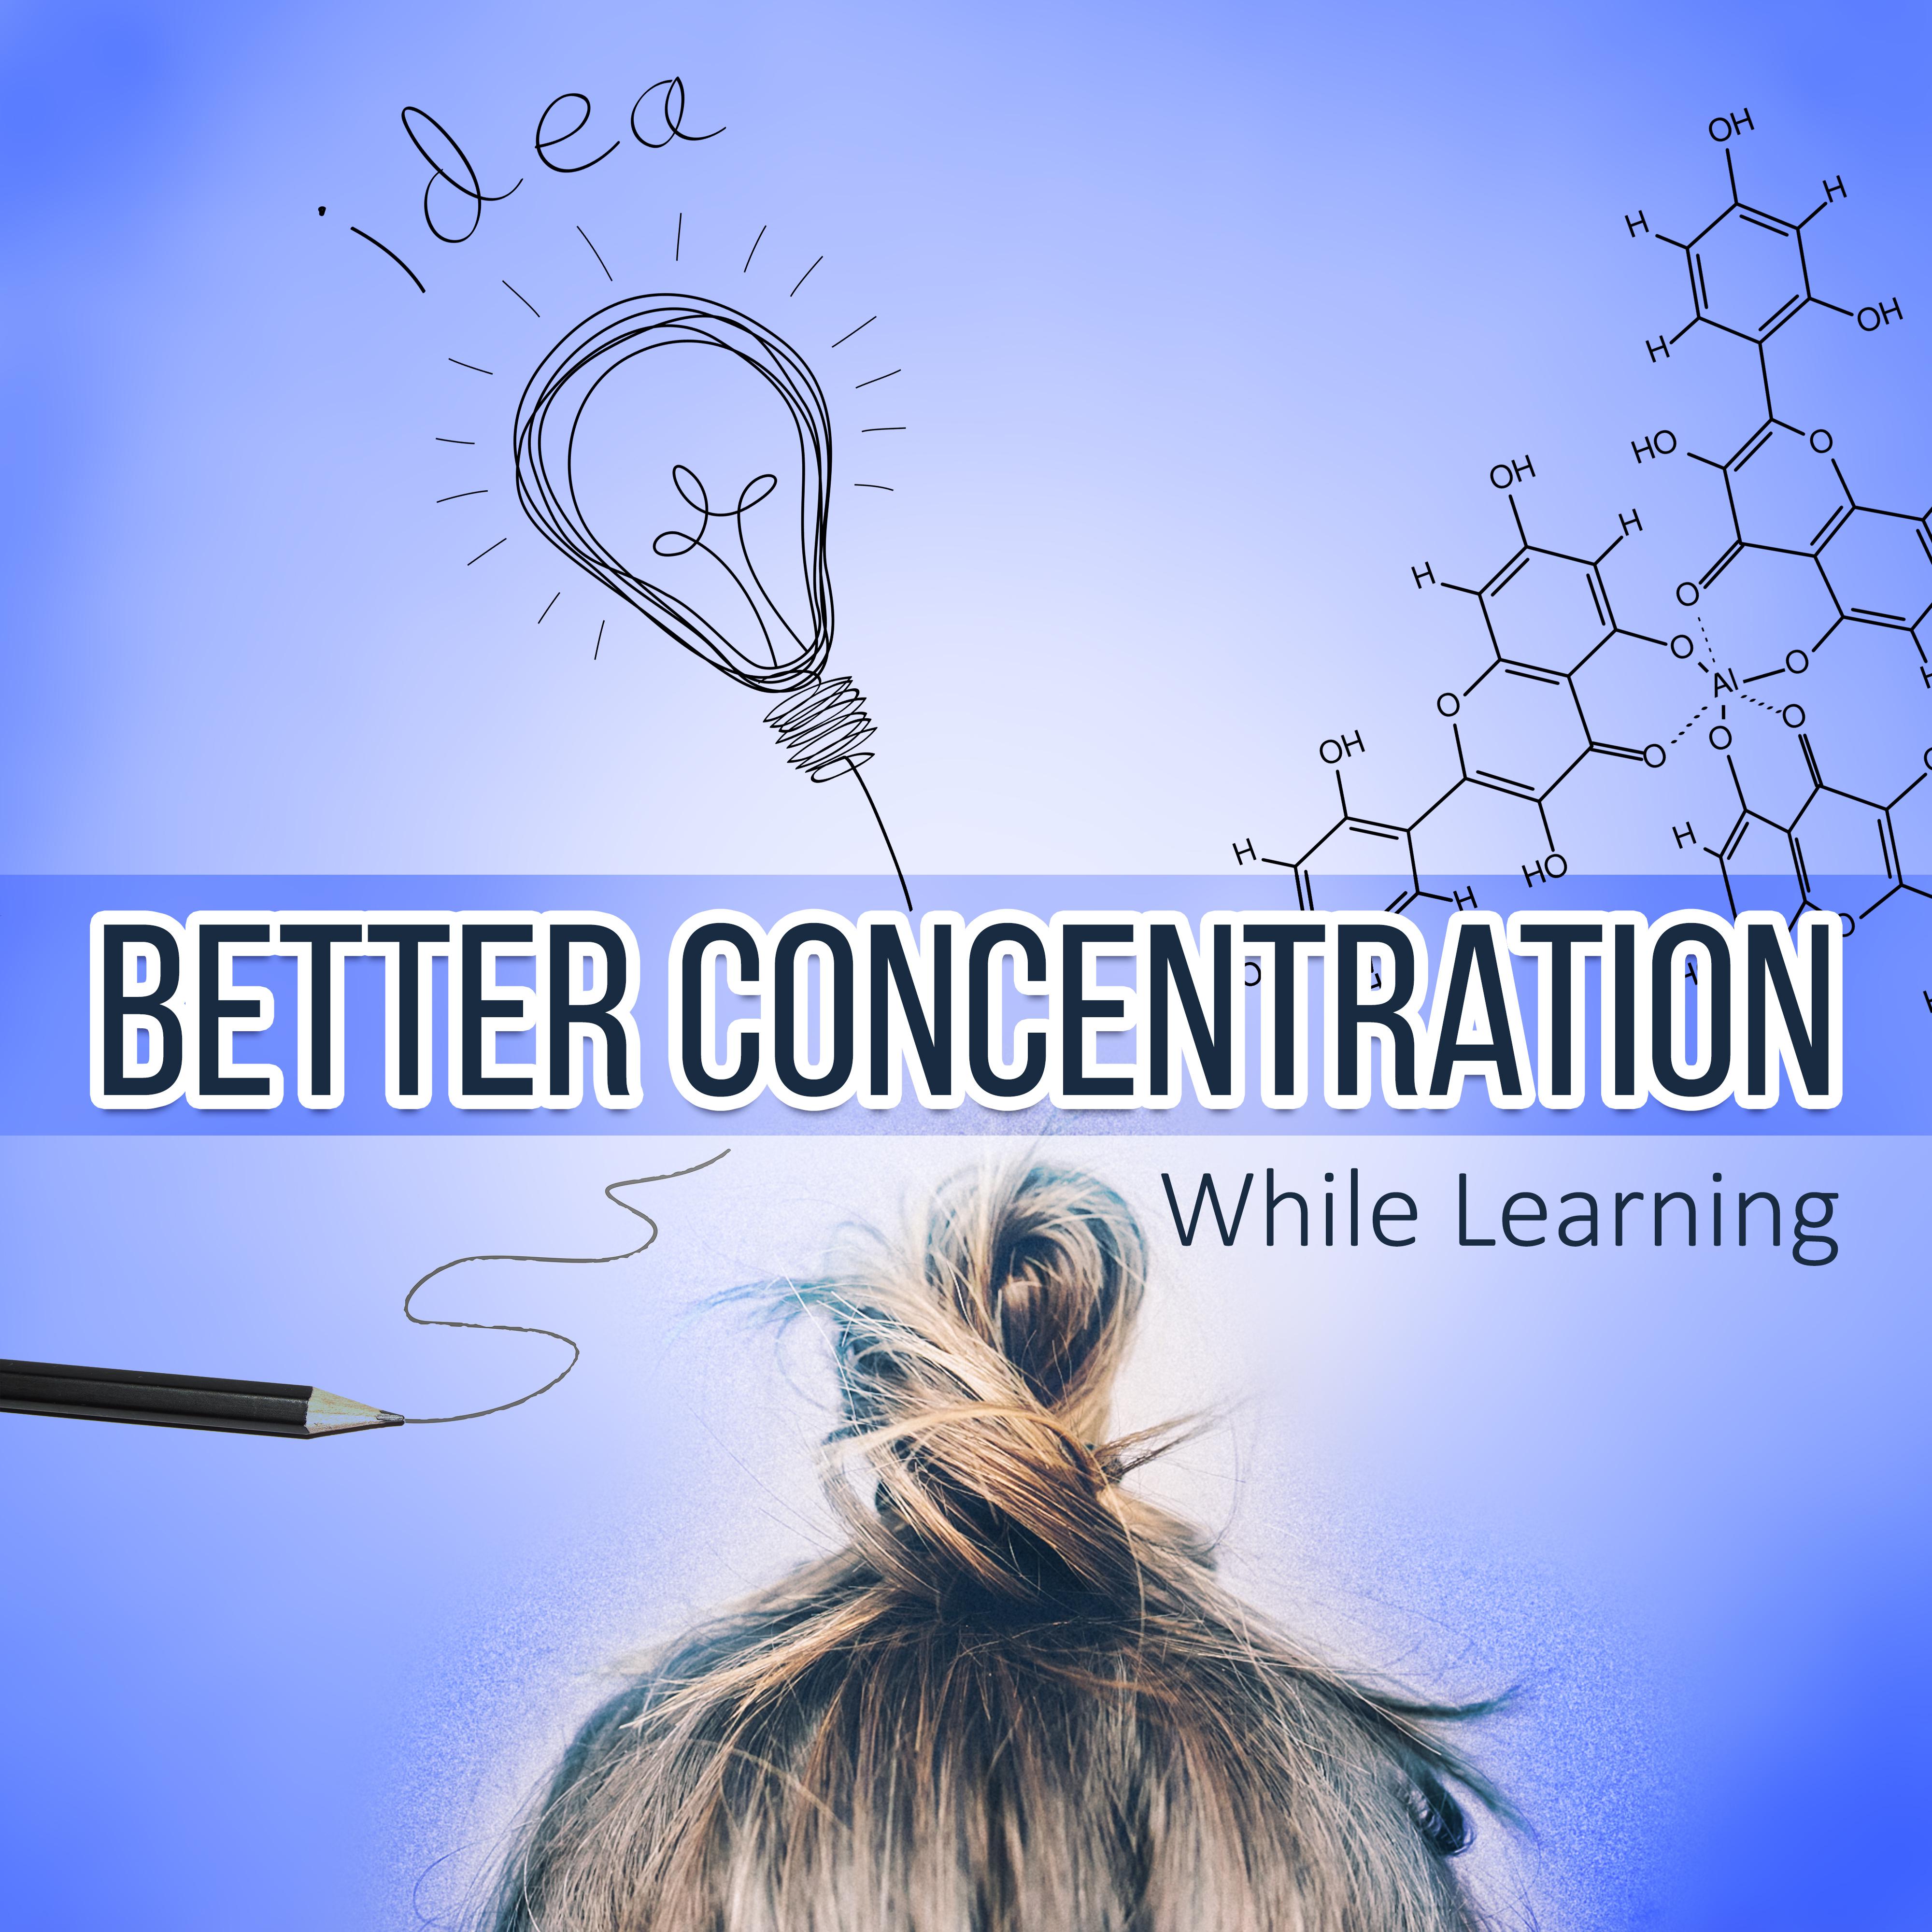 Better Concentration While Learning – Most Relaxing Music New Age for Easy Study, Concentration and Brain Power, Music Sounds of Nature for Focus, Clear the Mind, Exam Study